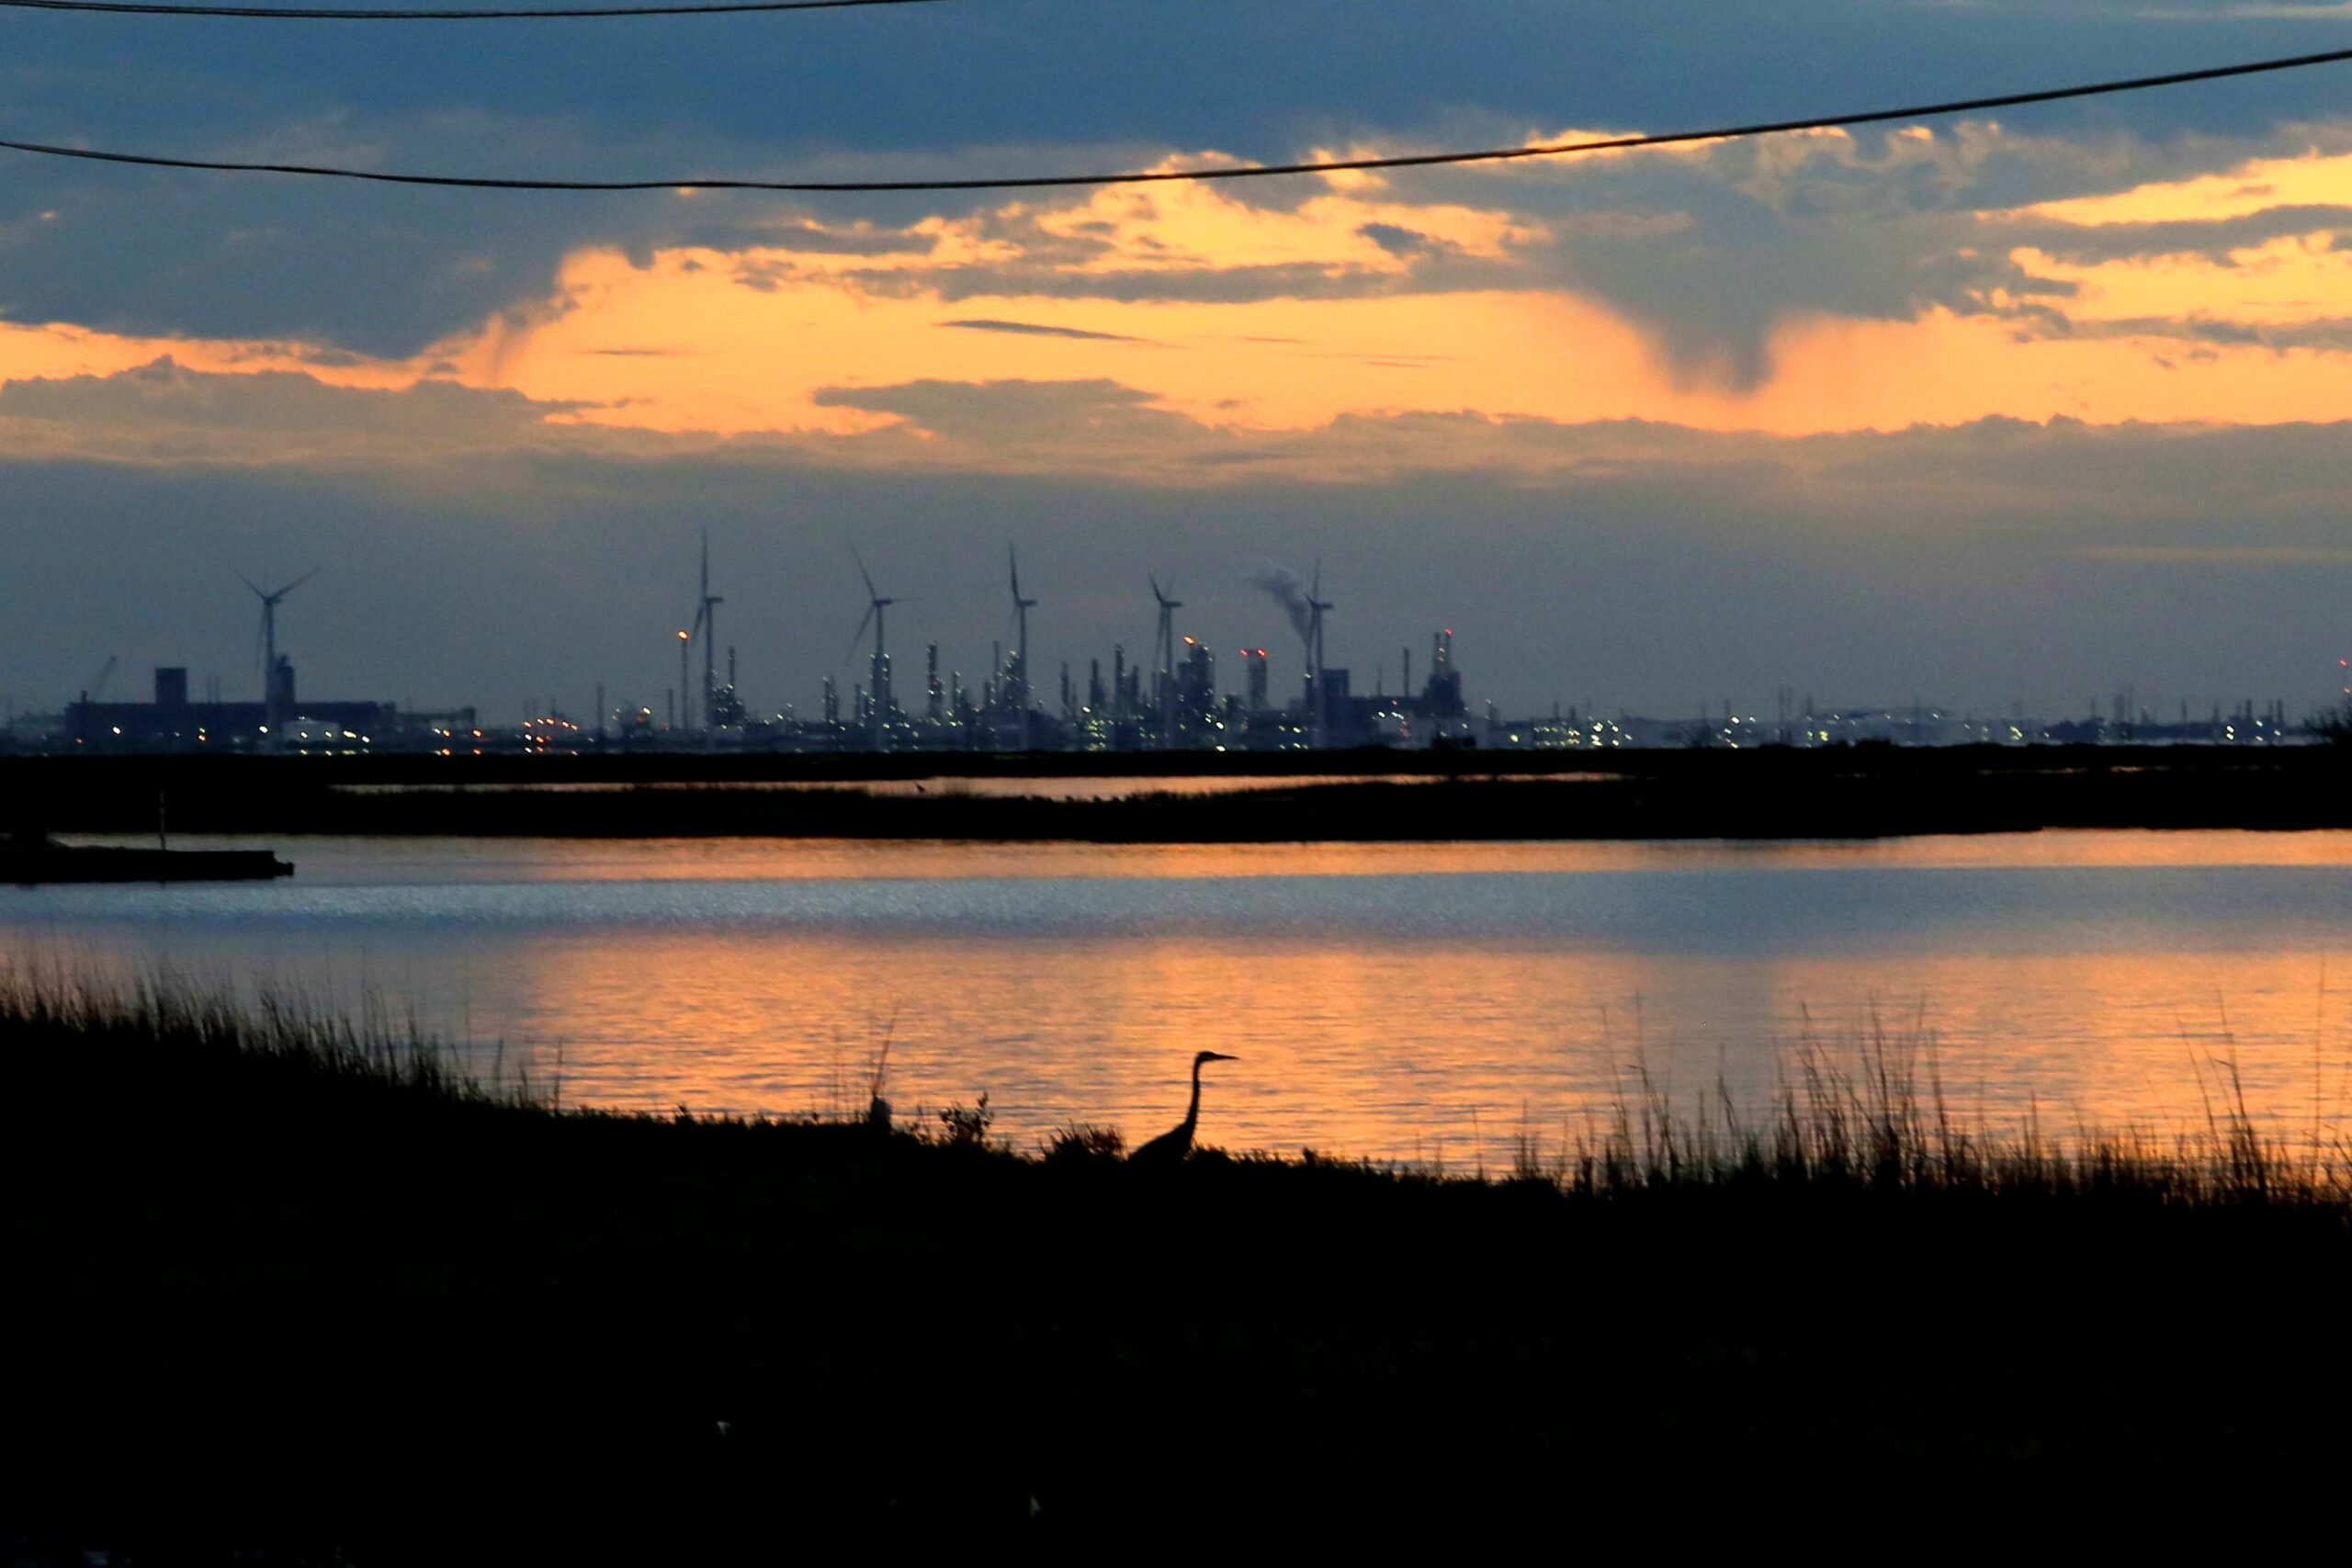 The sun is setting over the refineries and windmills along Nueces Bay